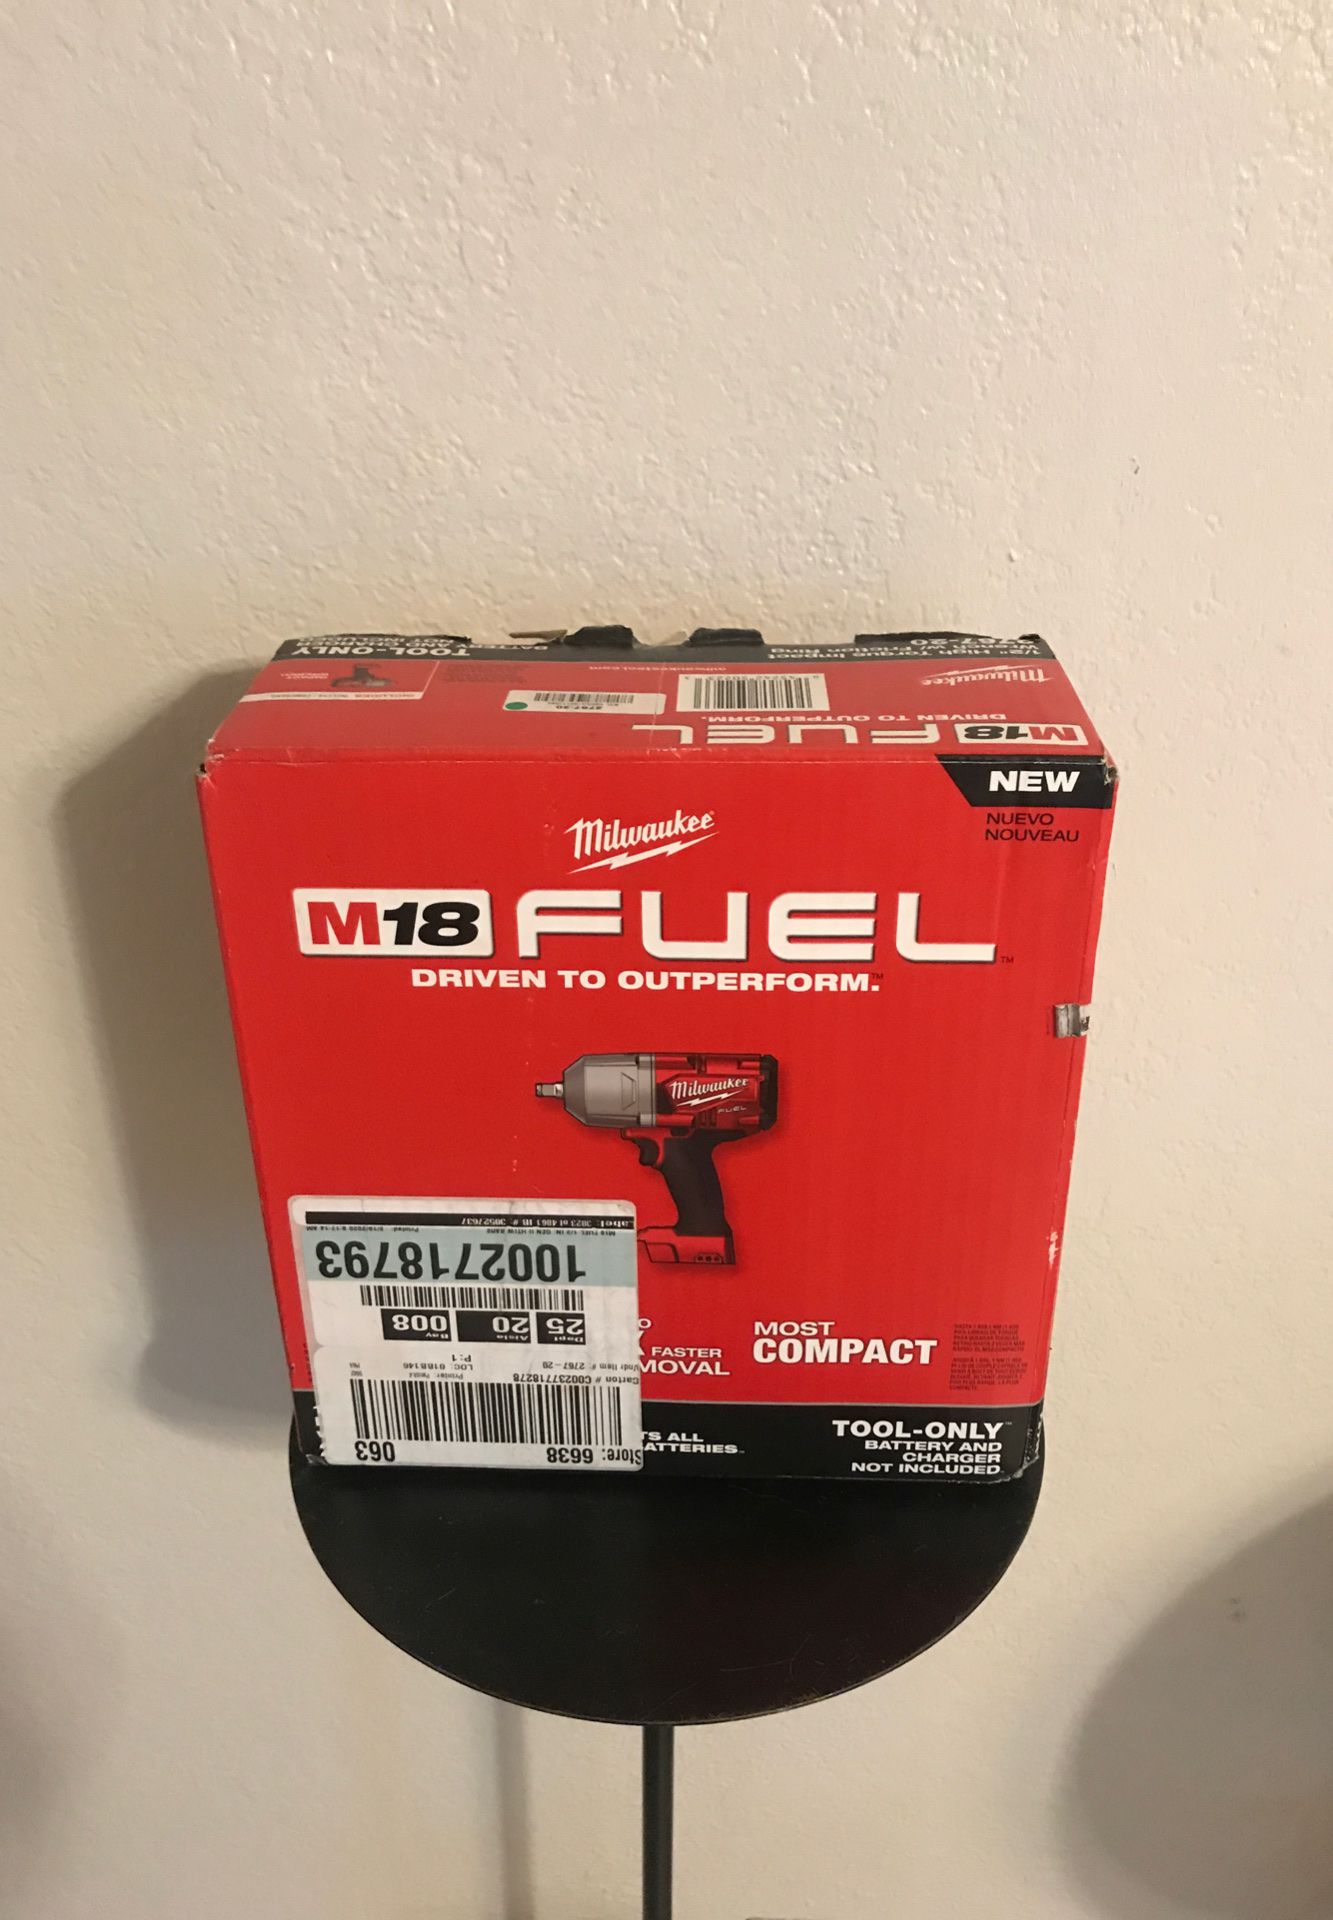 M18 HIGH TORQUE IMPACT WRENCH